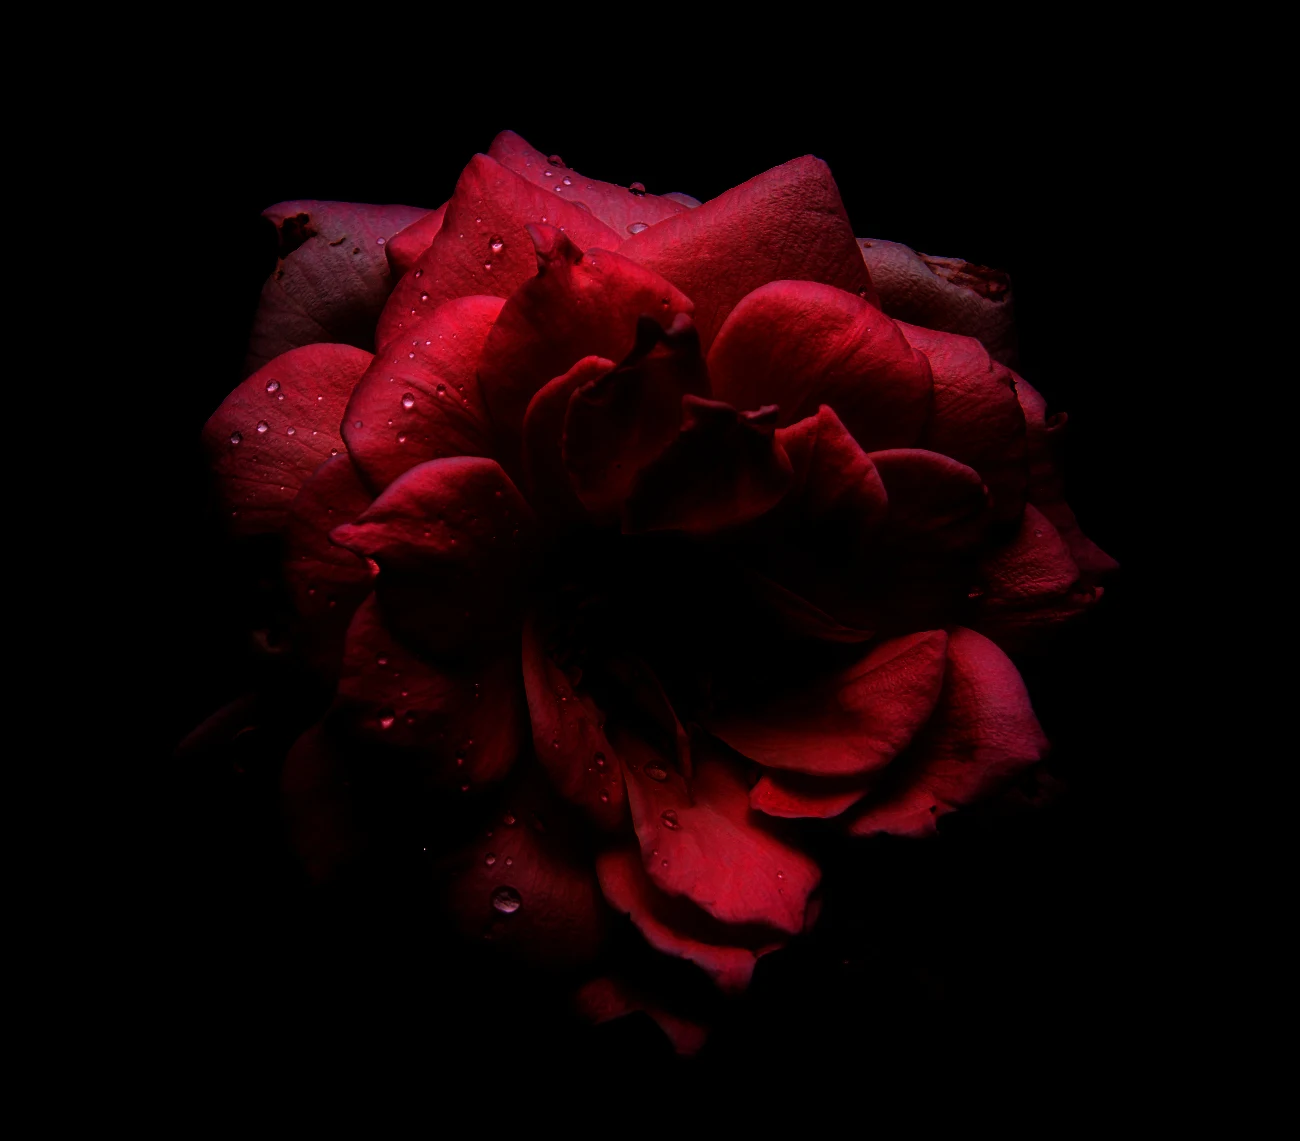 Roses are usually portrayed as soft and subtle. However I needed something dark and in your face powerful for a blog. 